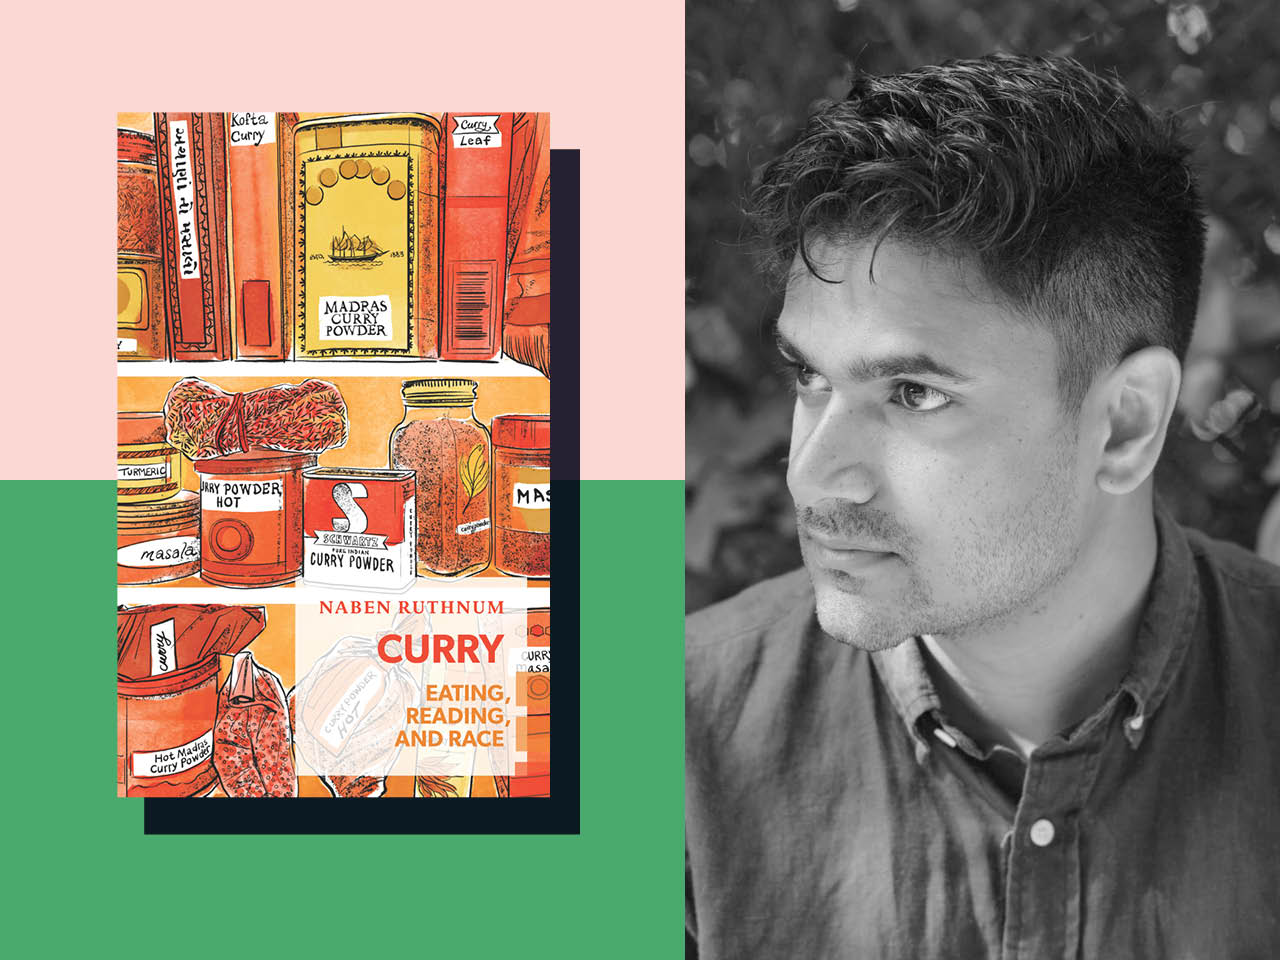 Is Your Curry 'Authentic'? A New Book Explores Eating, Reading and Race